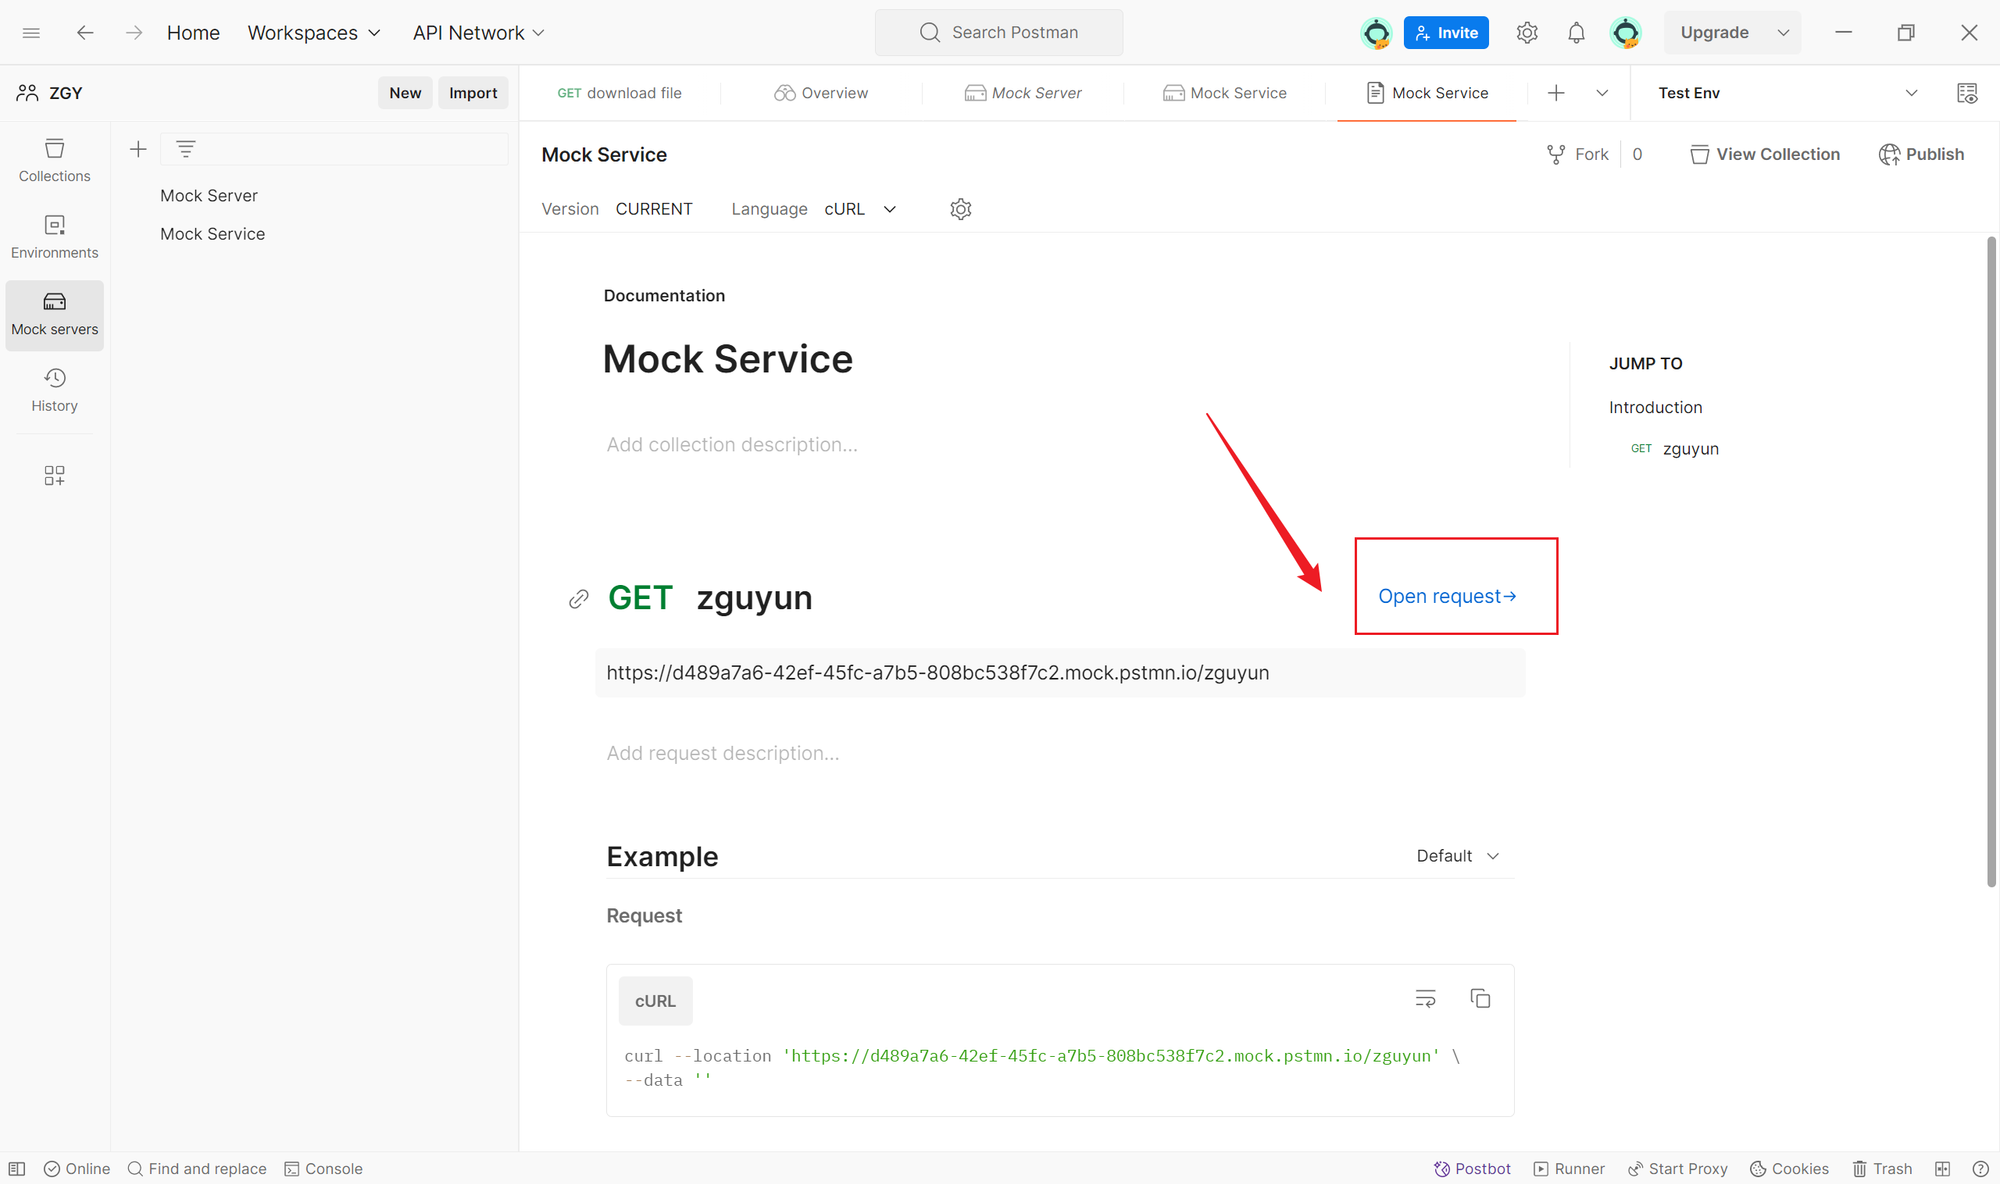 enable and utilize the Mock server in Postman